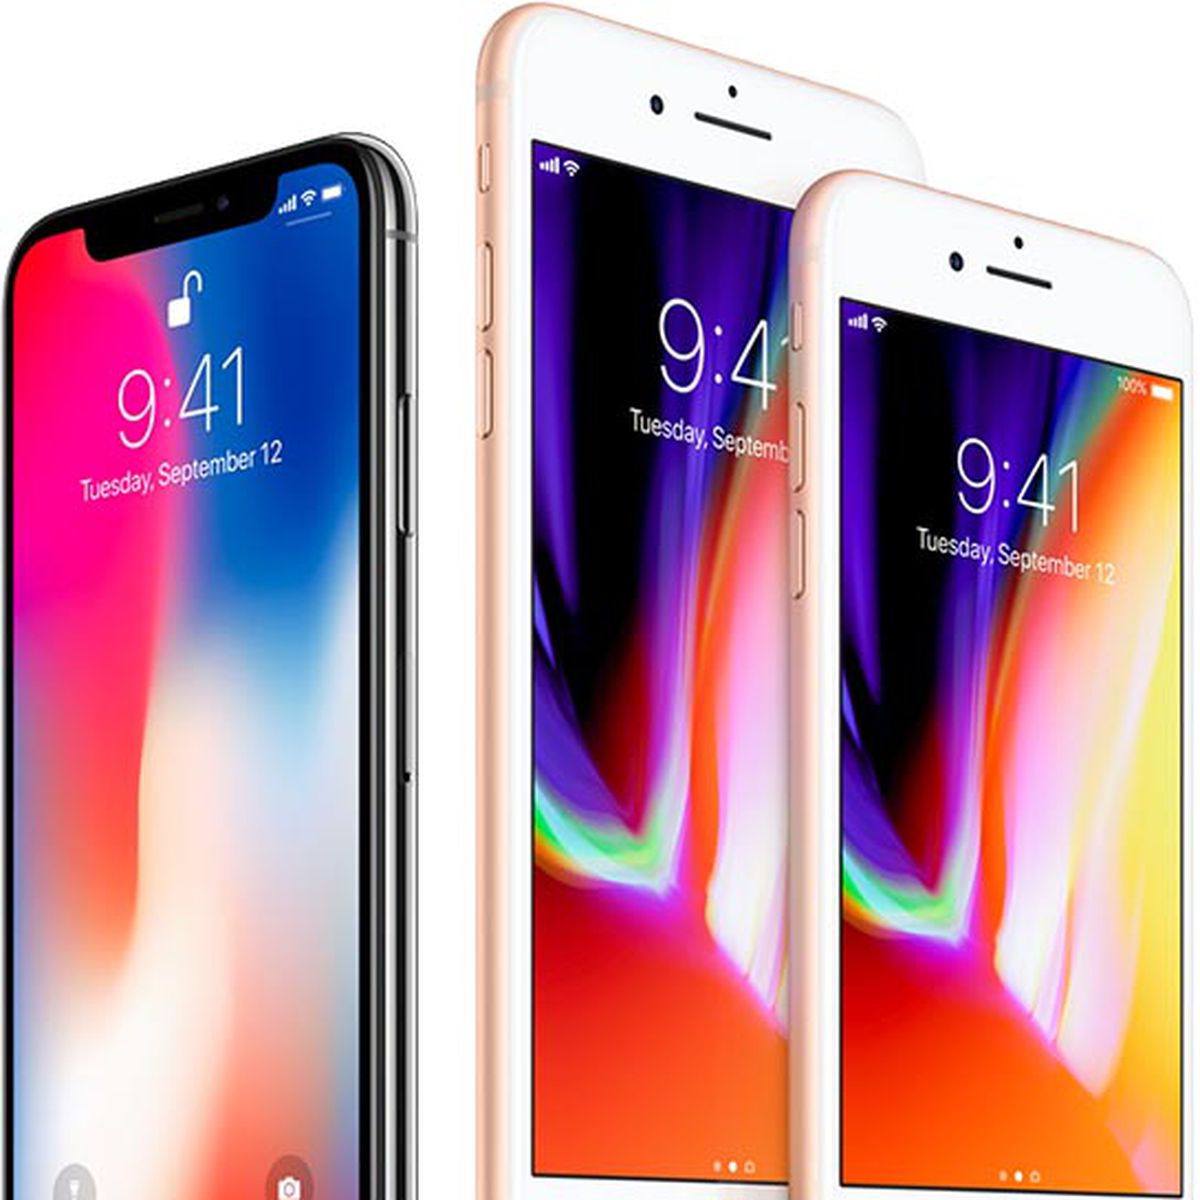 iPhone X vs. iPhone 8 8 Plus: Display Sizes, Battery Life, Face vs. Touch ID - MacRumors